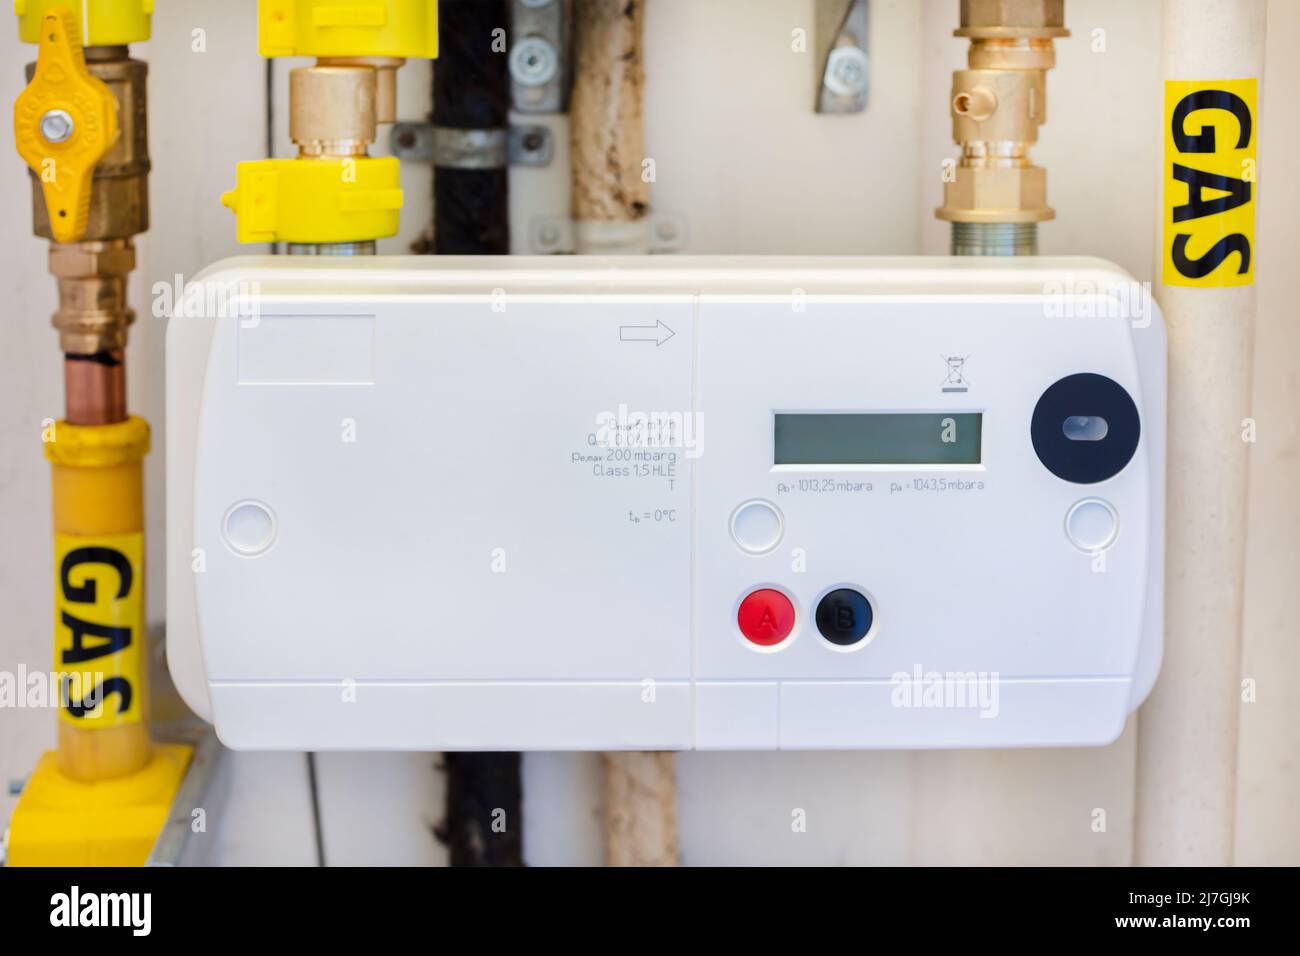 Newly installed Dutch smart gas meter with wireless connection to the energy supplier Stock Photo